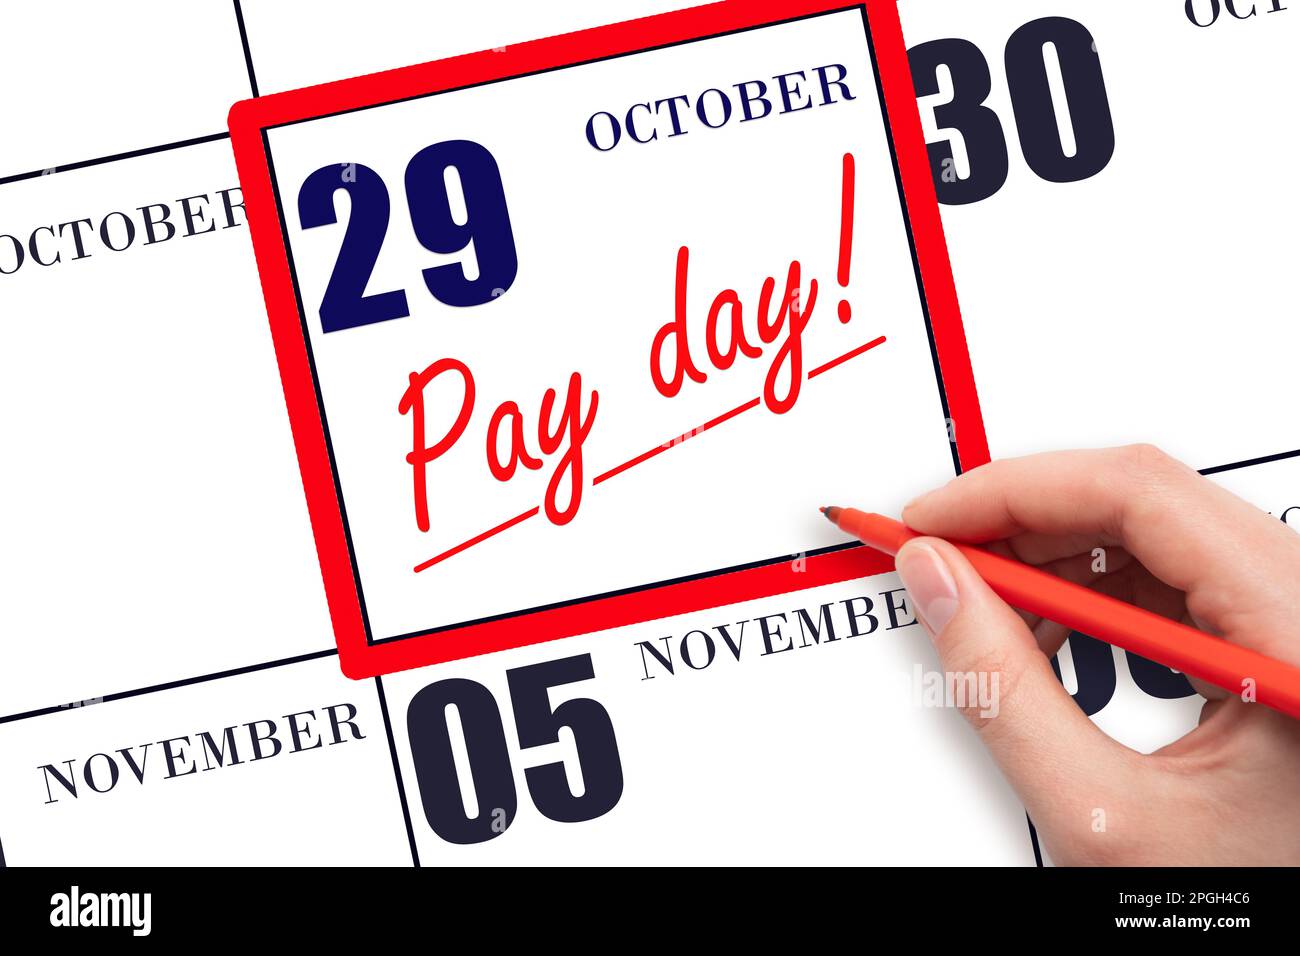 29th day of October. Hand writing text PAY DATE on calendar date October 29 and underline it. Payment due date. Reminder concept of payment. Autumn mo Stock Photo